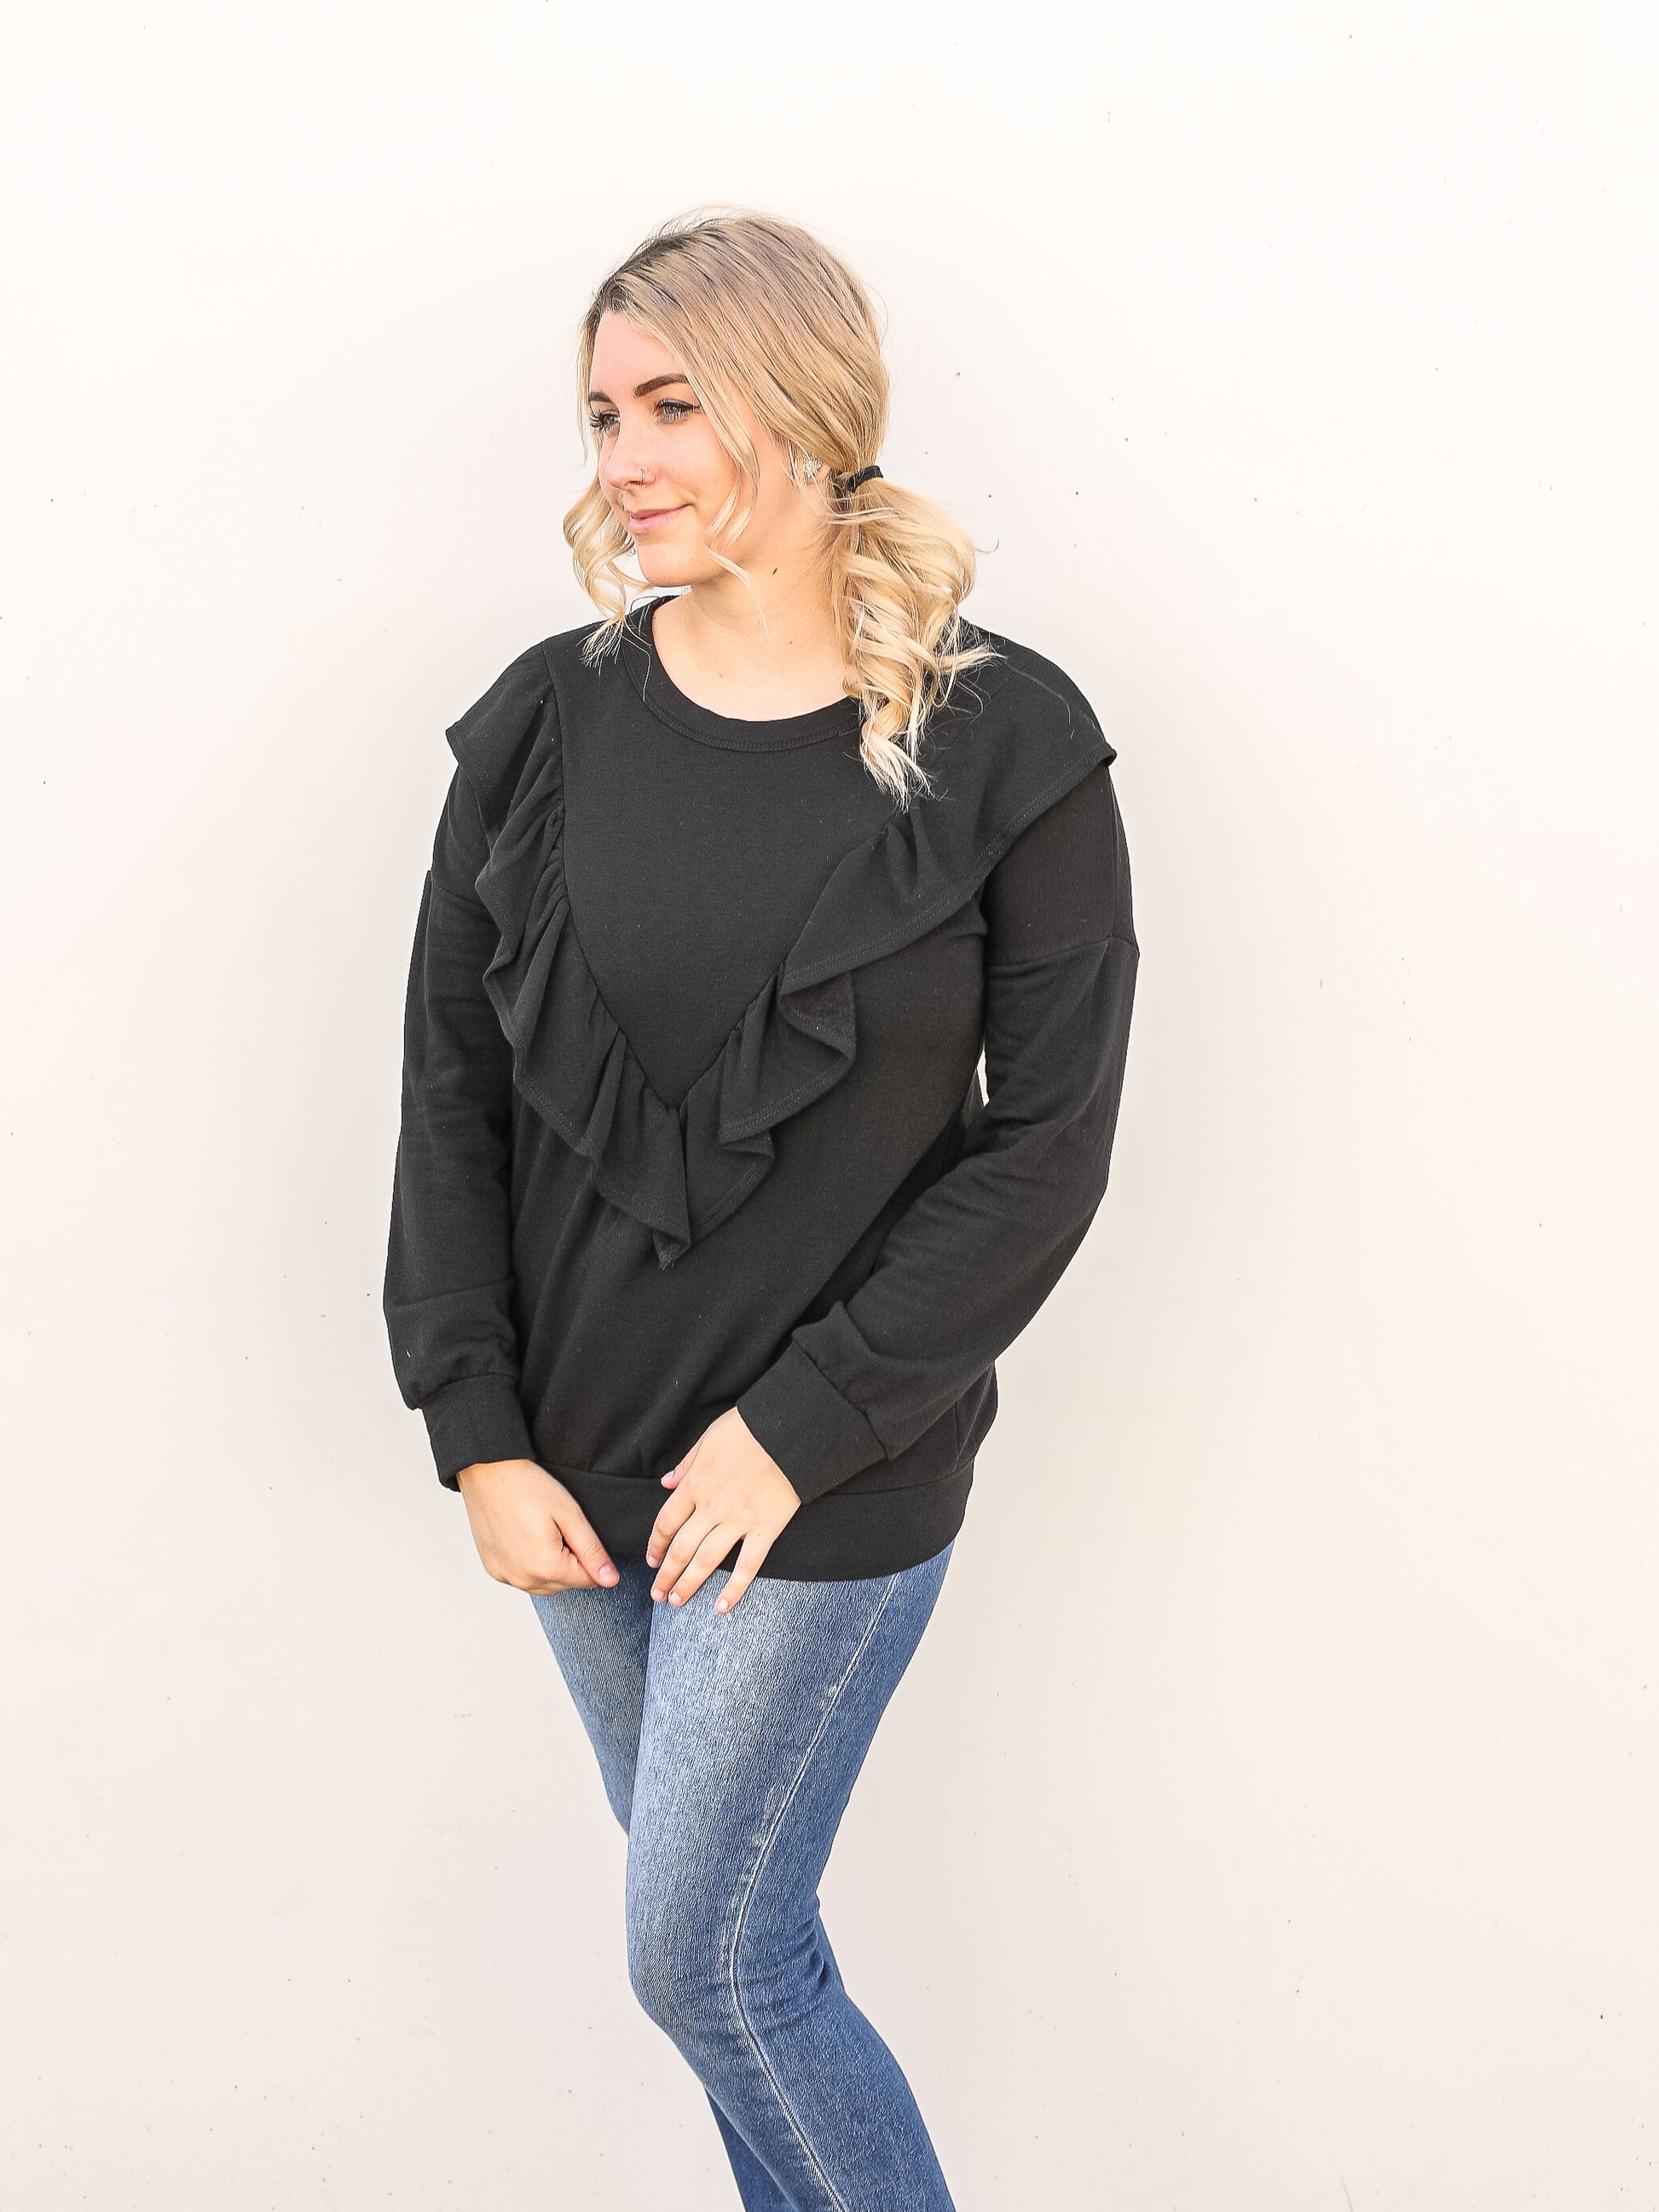 black ruffled top with jeans